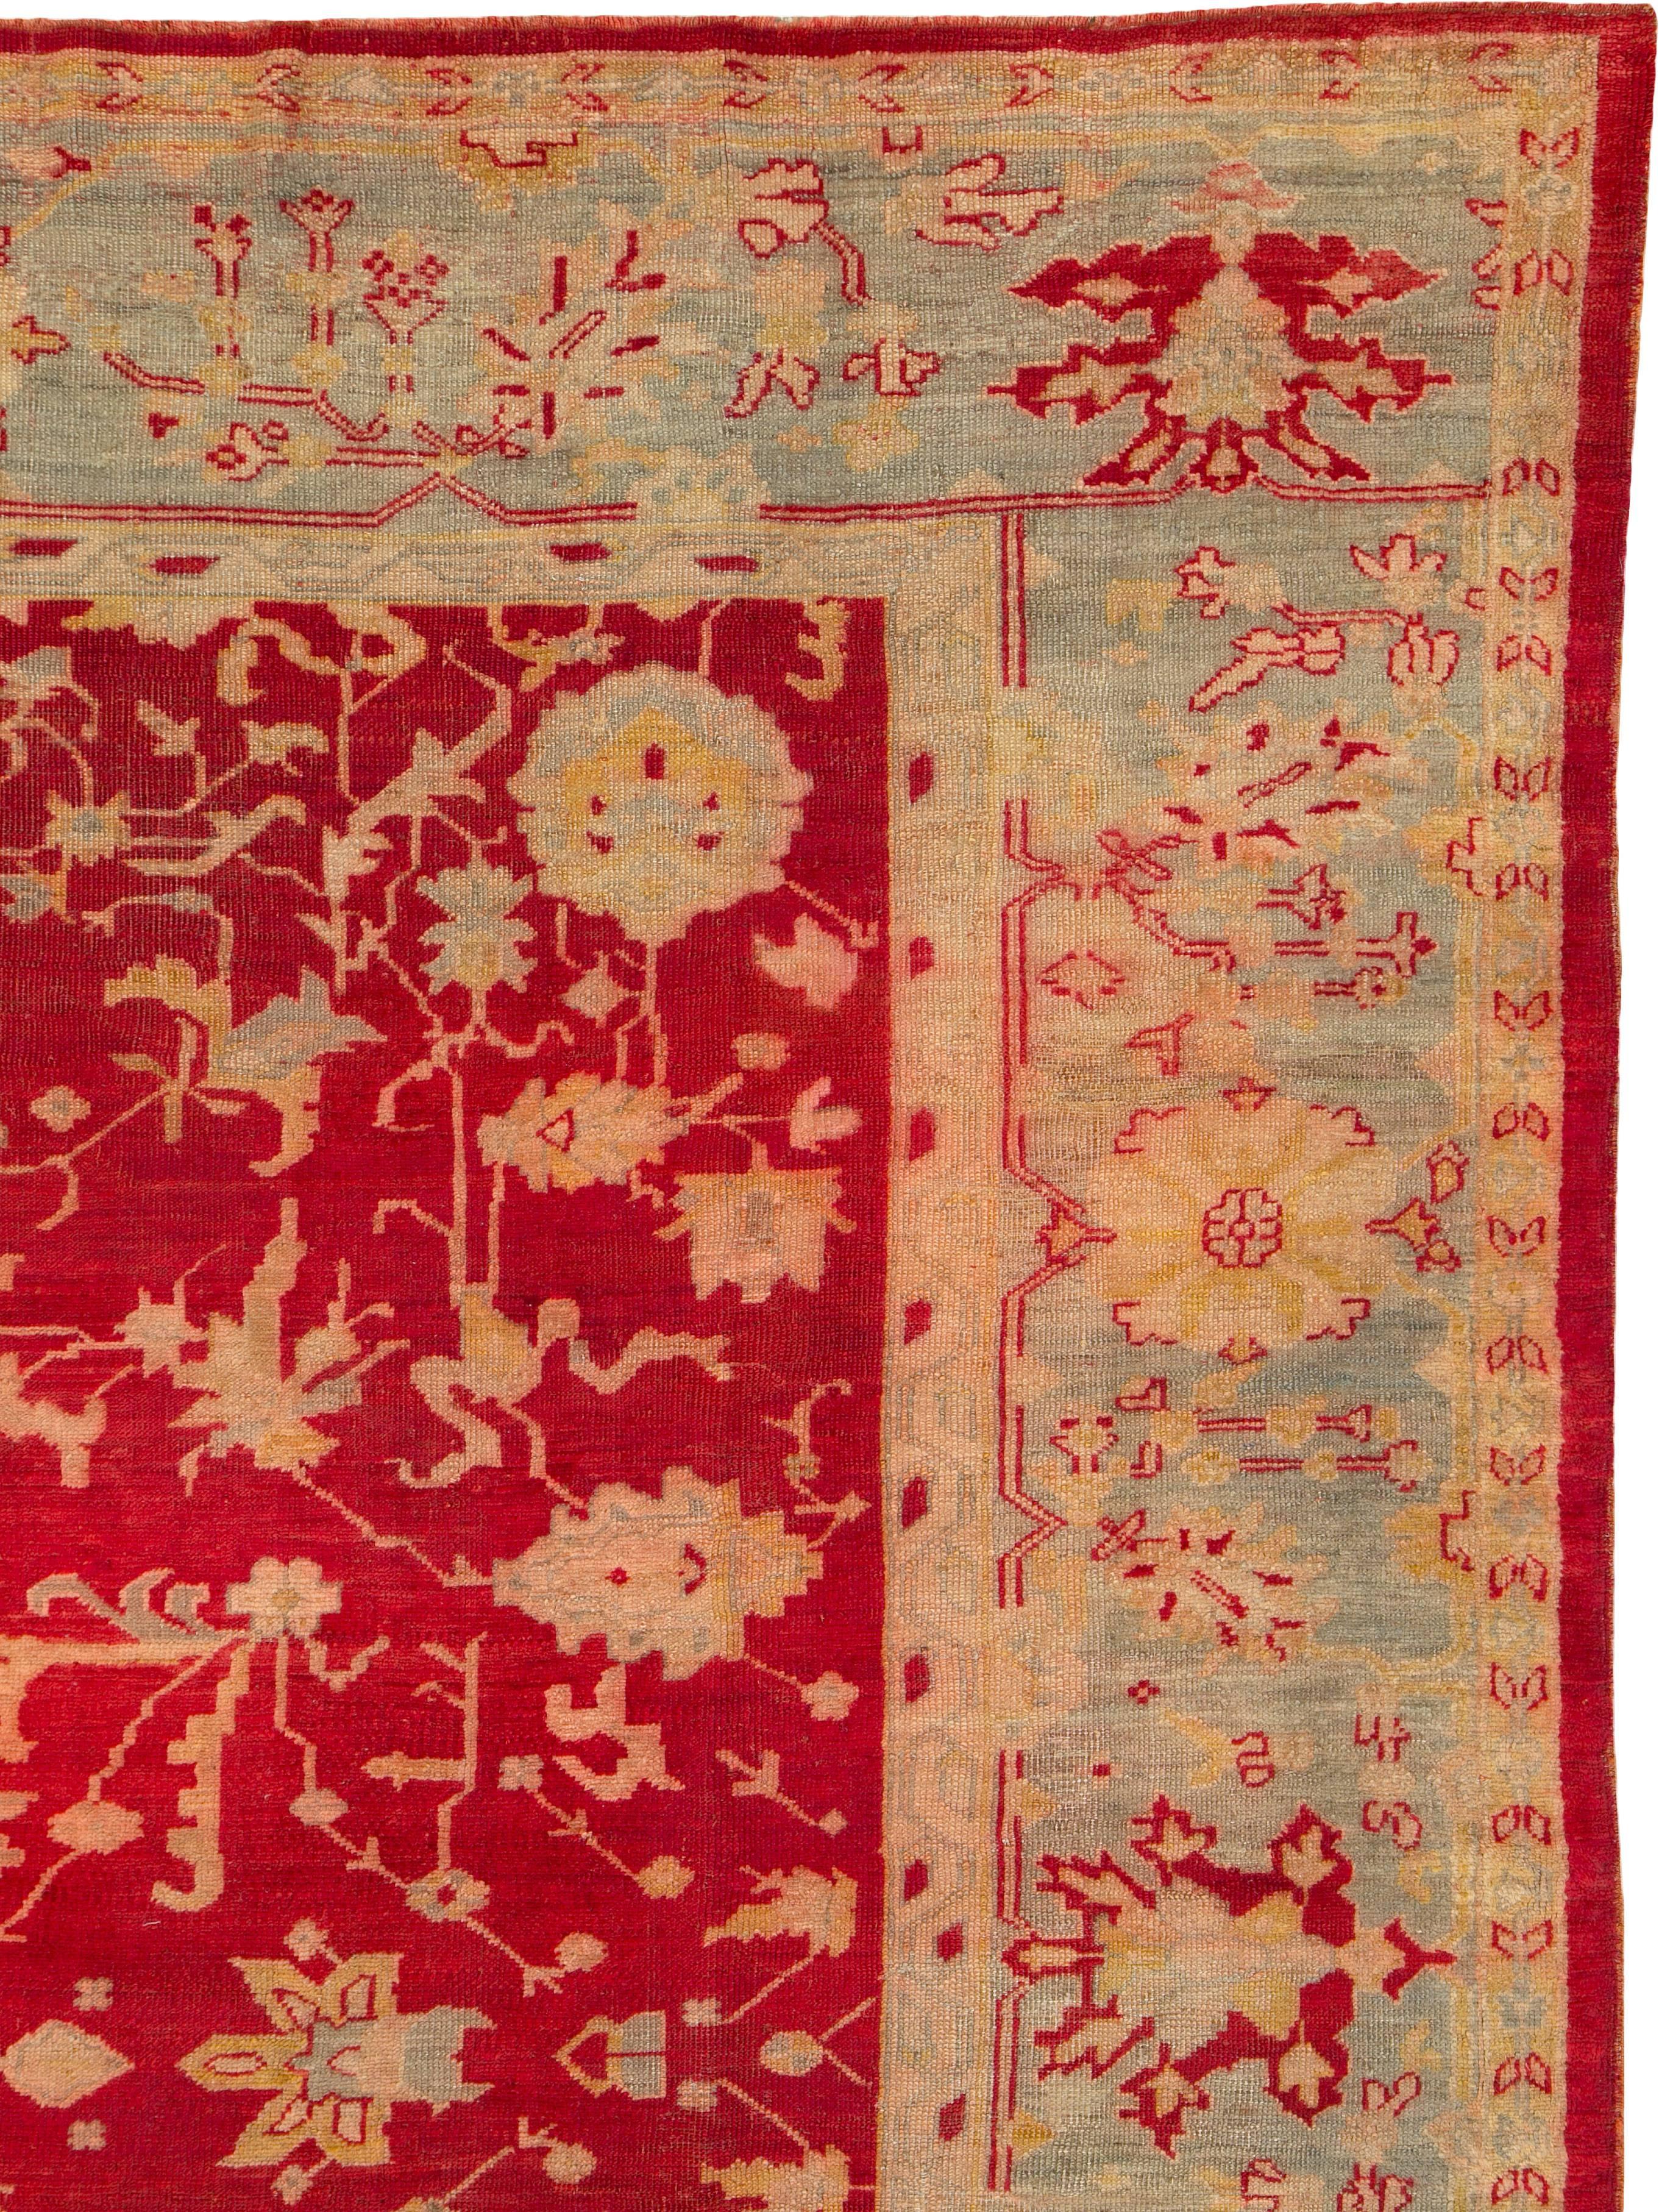 Early 20th Century Handmade Turkish Oushak Room Size Carpet in Red and Grey In Good Condition For Sale In New York, NY